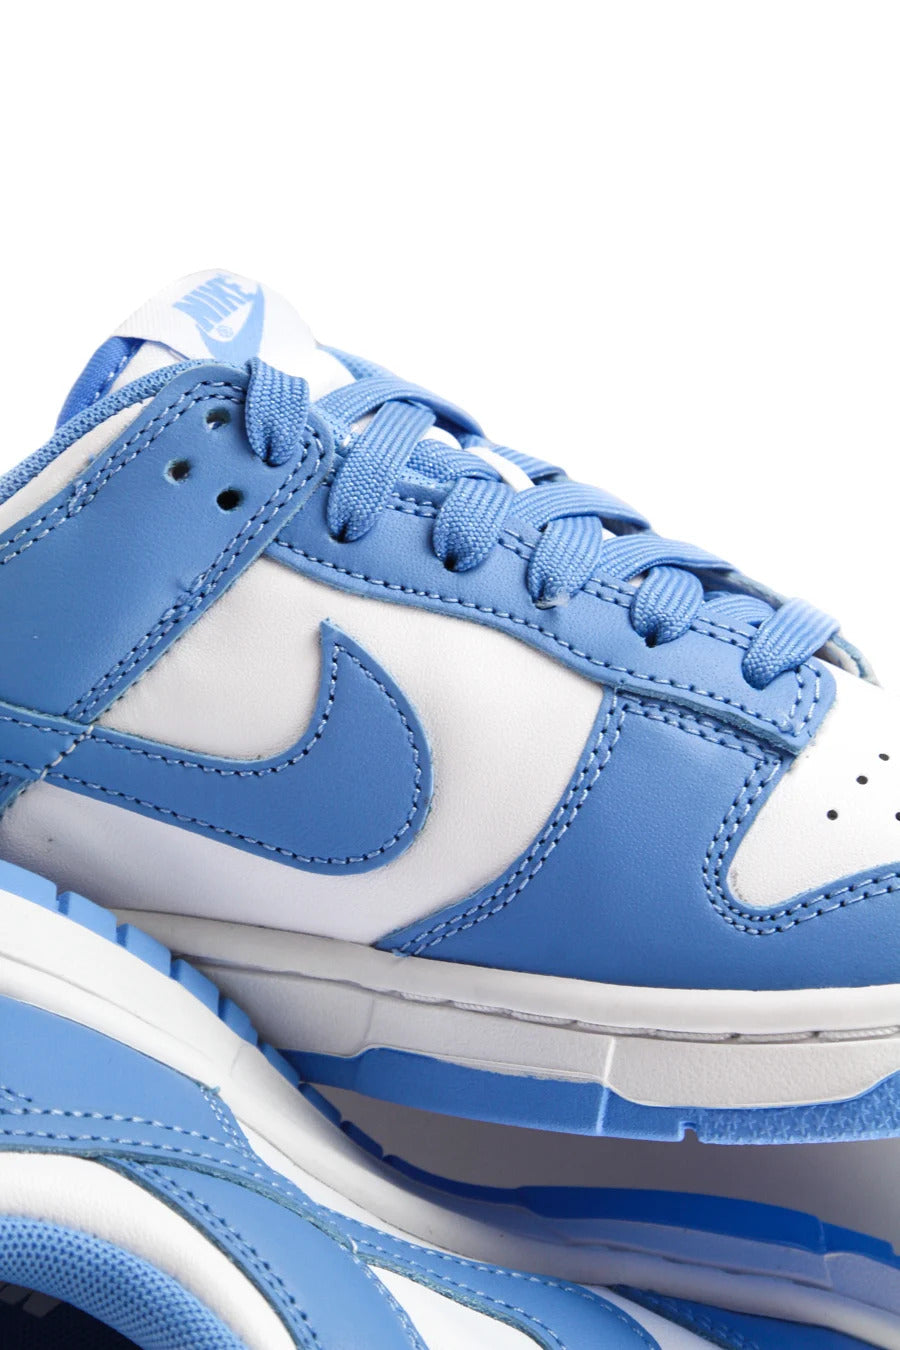 Detail of the Nike Dunk Low Retro UNC low sneakers